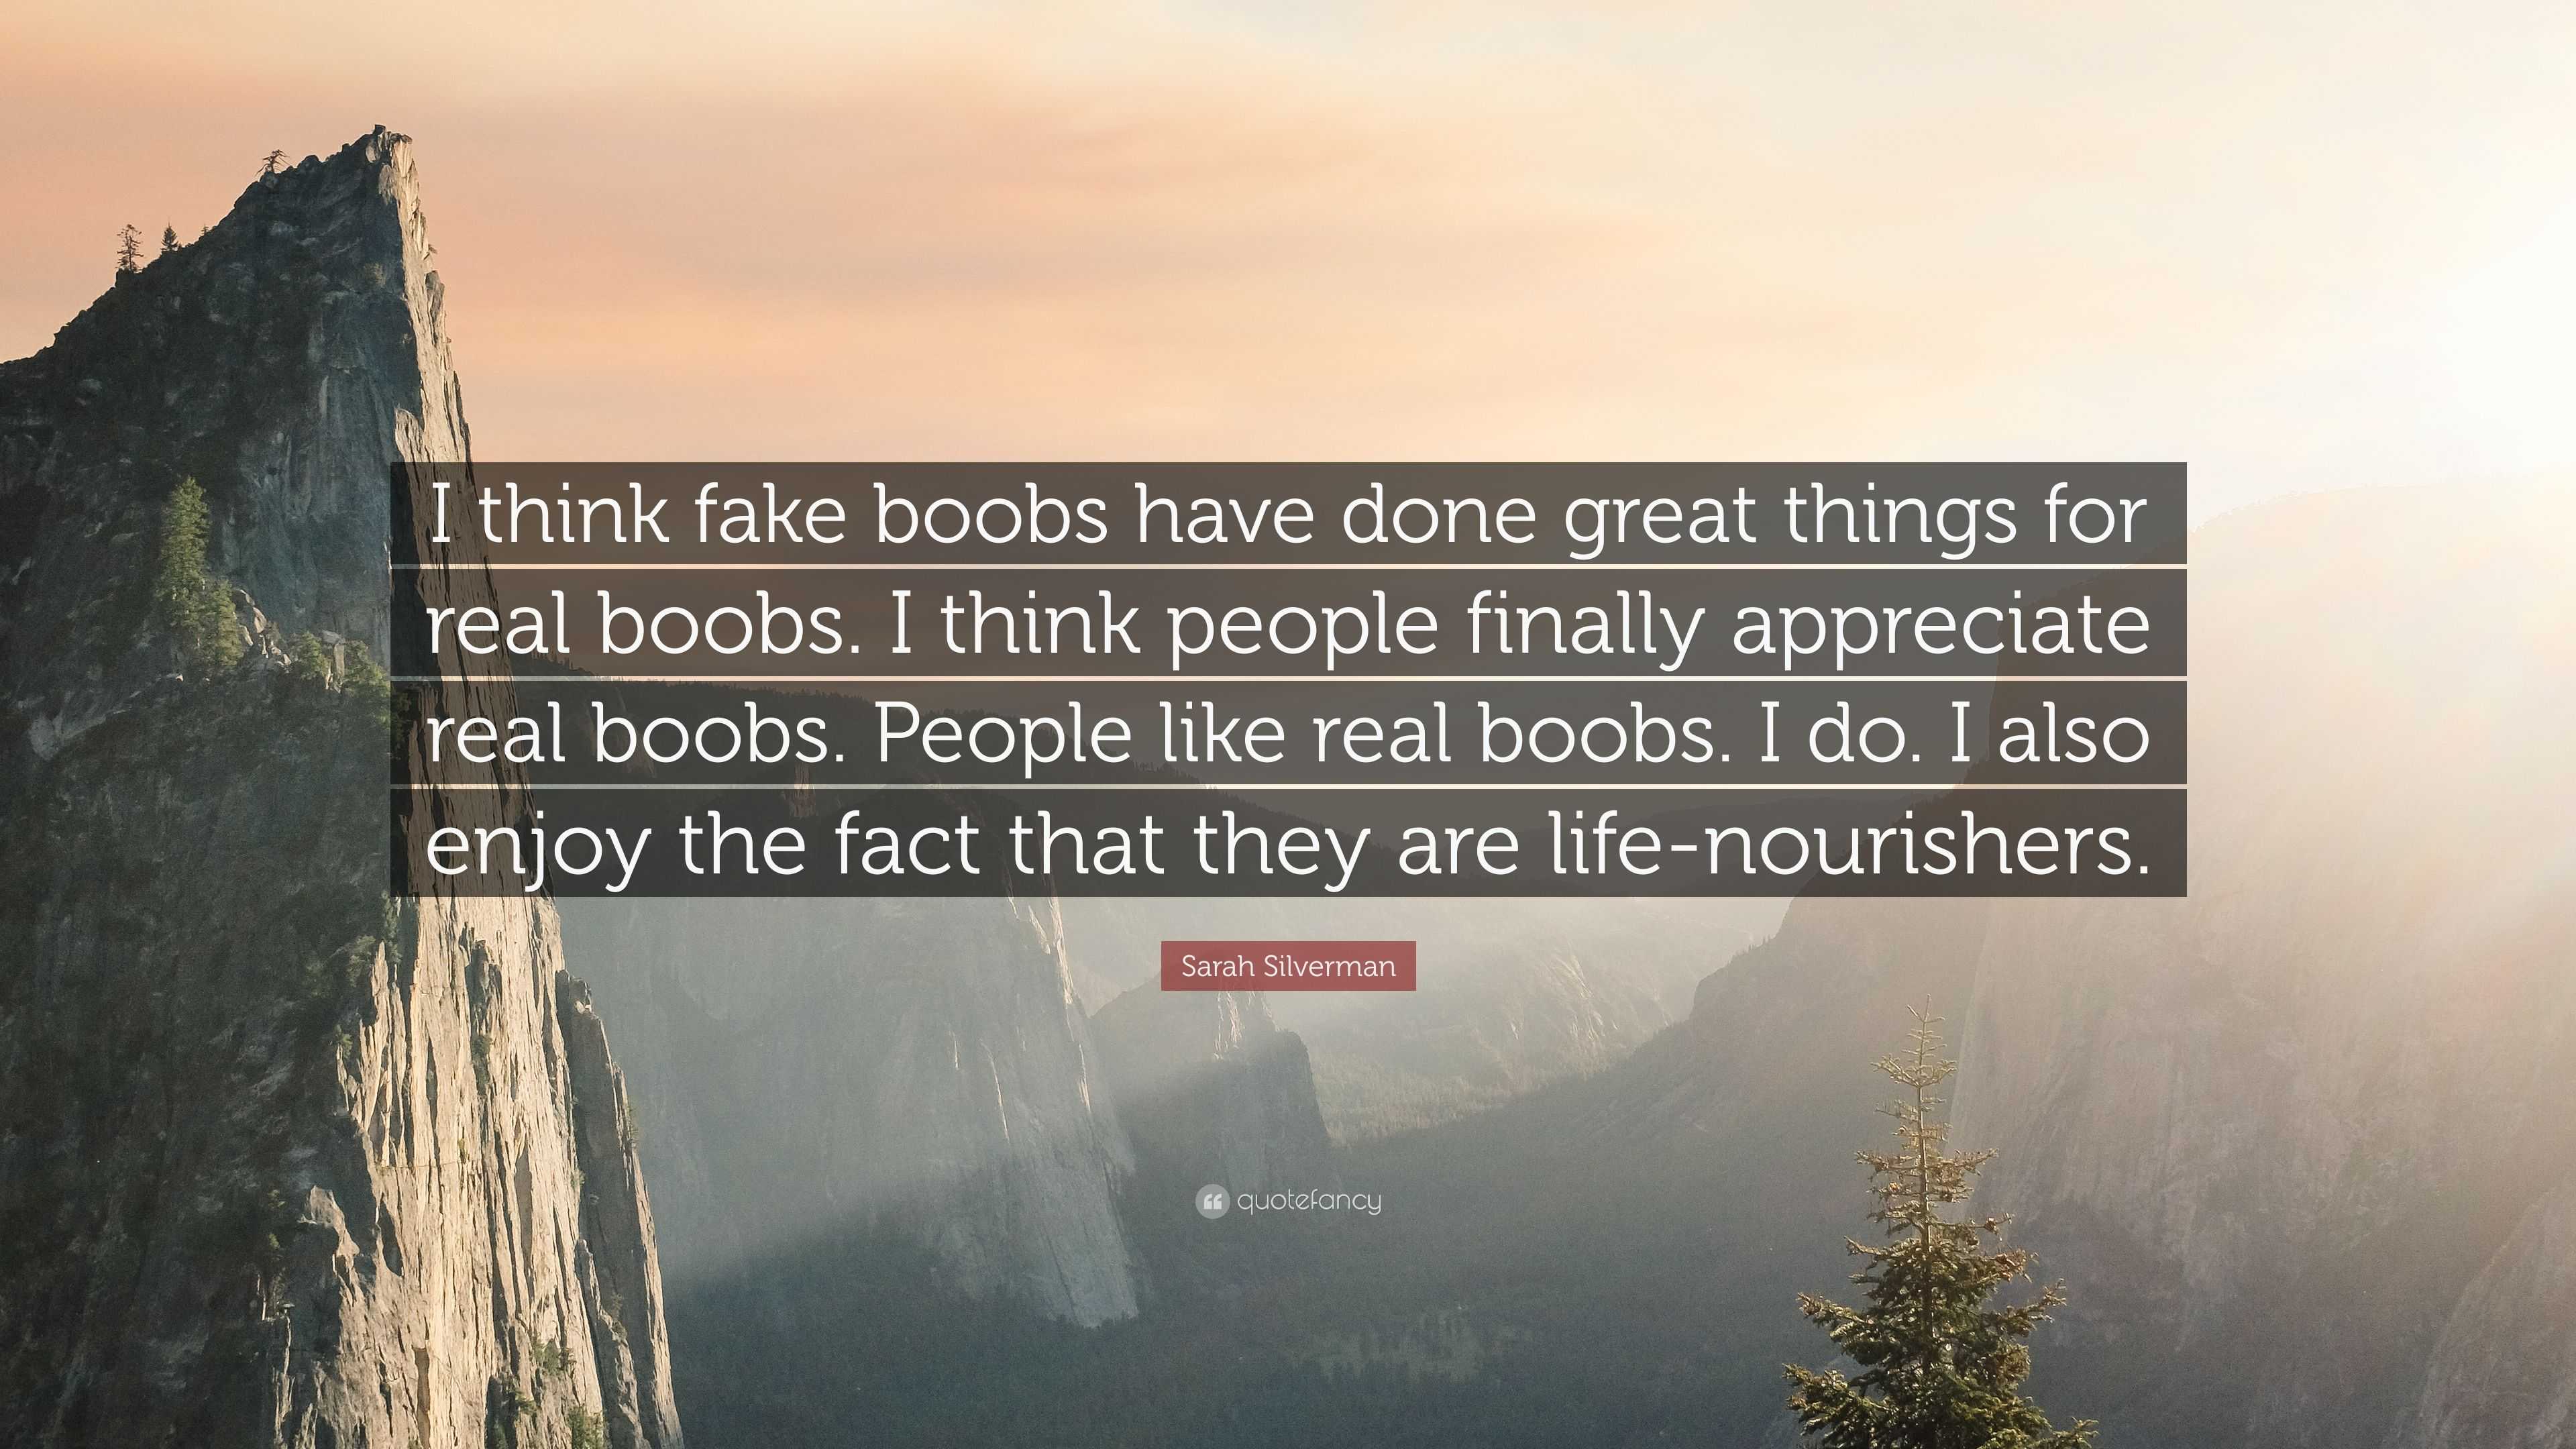 Sarah Silverman Quote: “I think fake boobs have done great things for real  boobs. I think people finally appreciate real boobs. People like real”